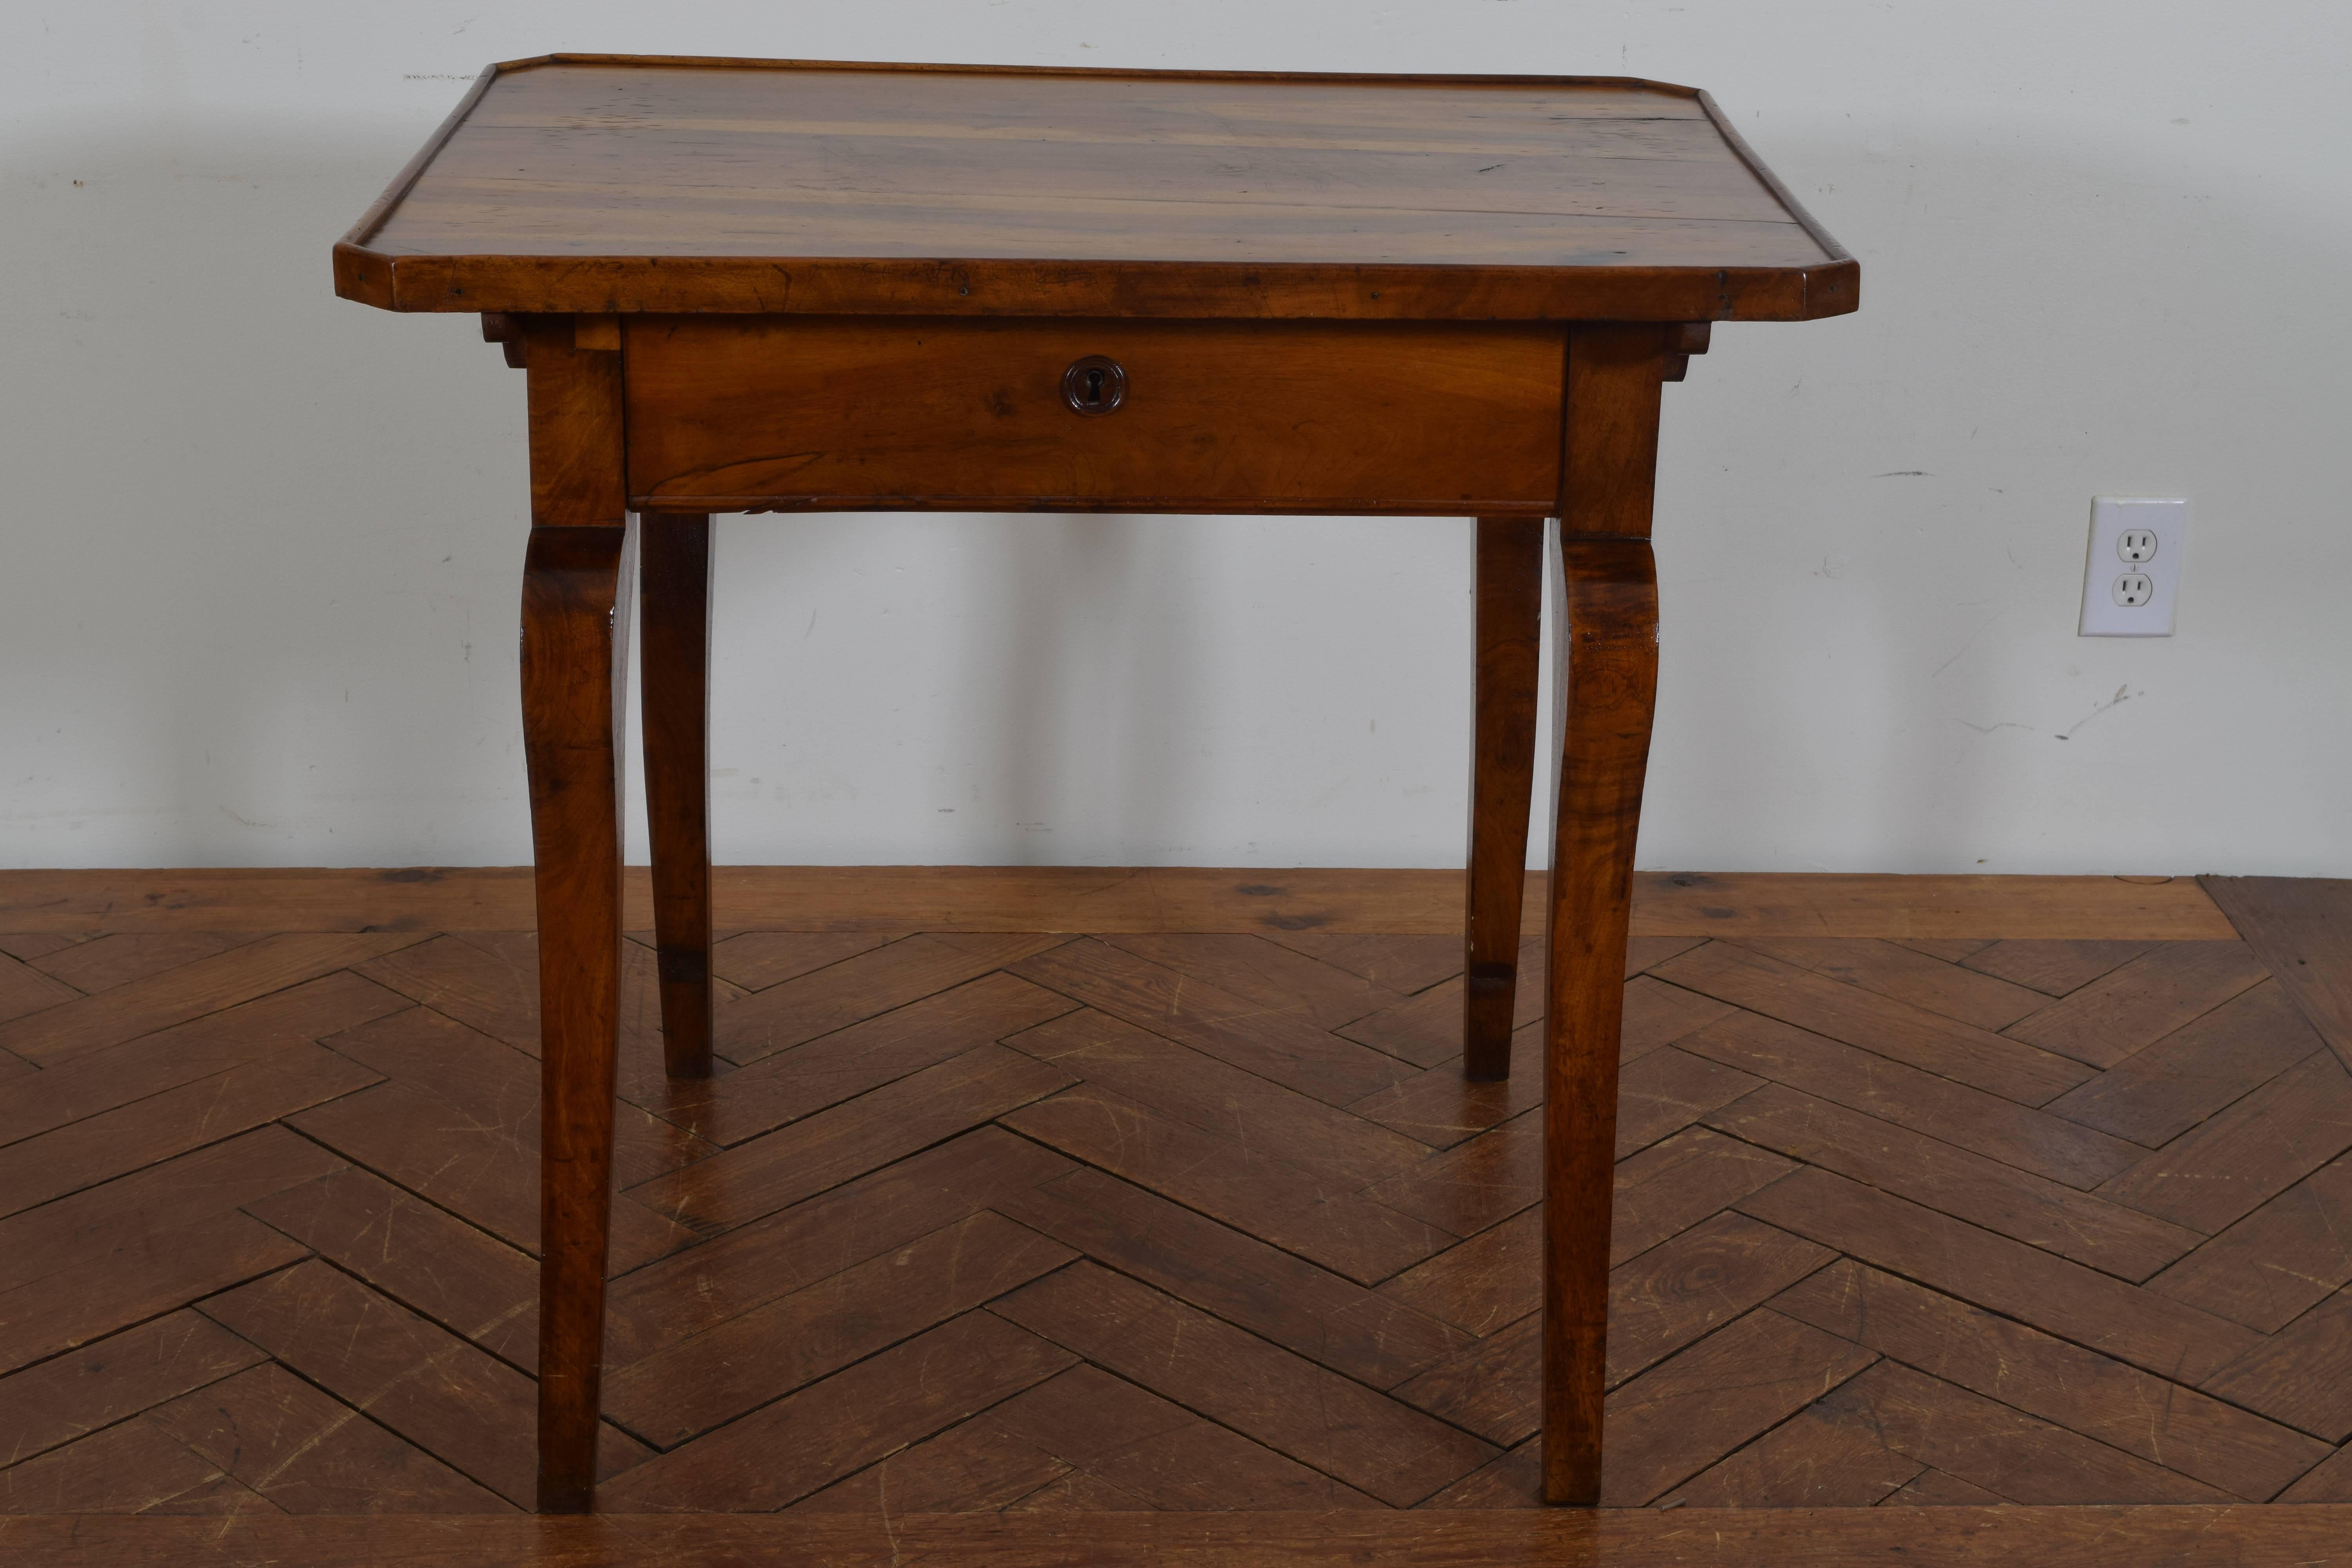 Having a top with canted corners and beautiful grain pattern, with one drawer, raised on interestingly shaped legs.